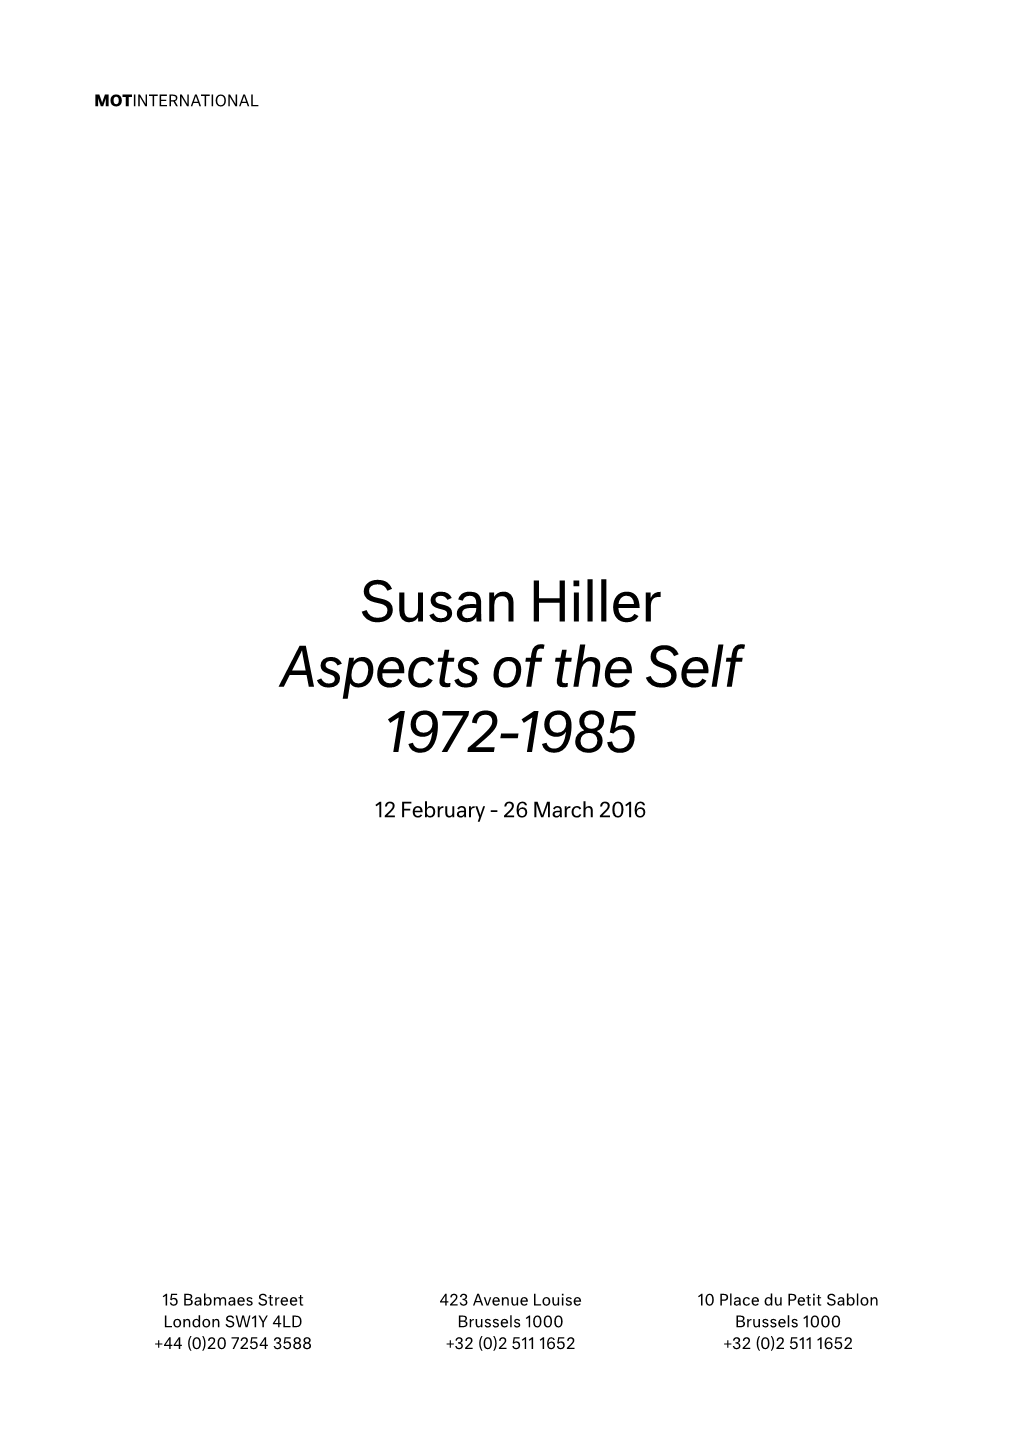 Susan Hiller Aspects of the Self 1972-1985